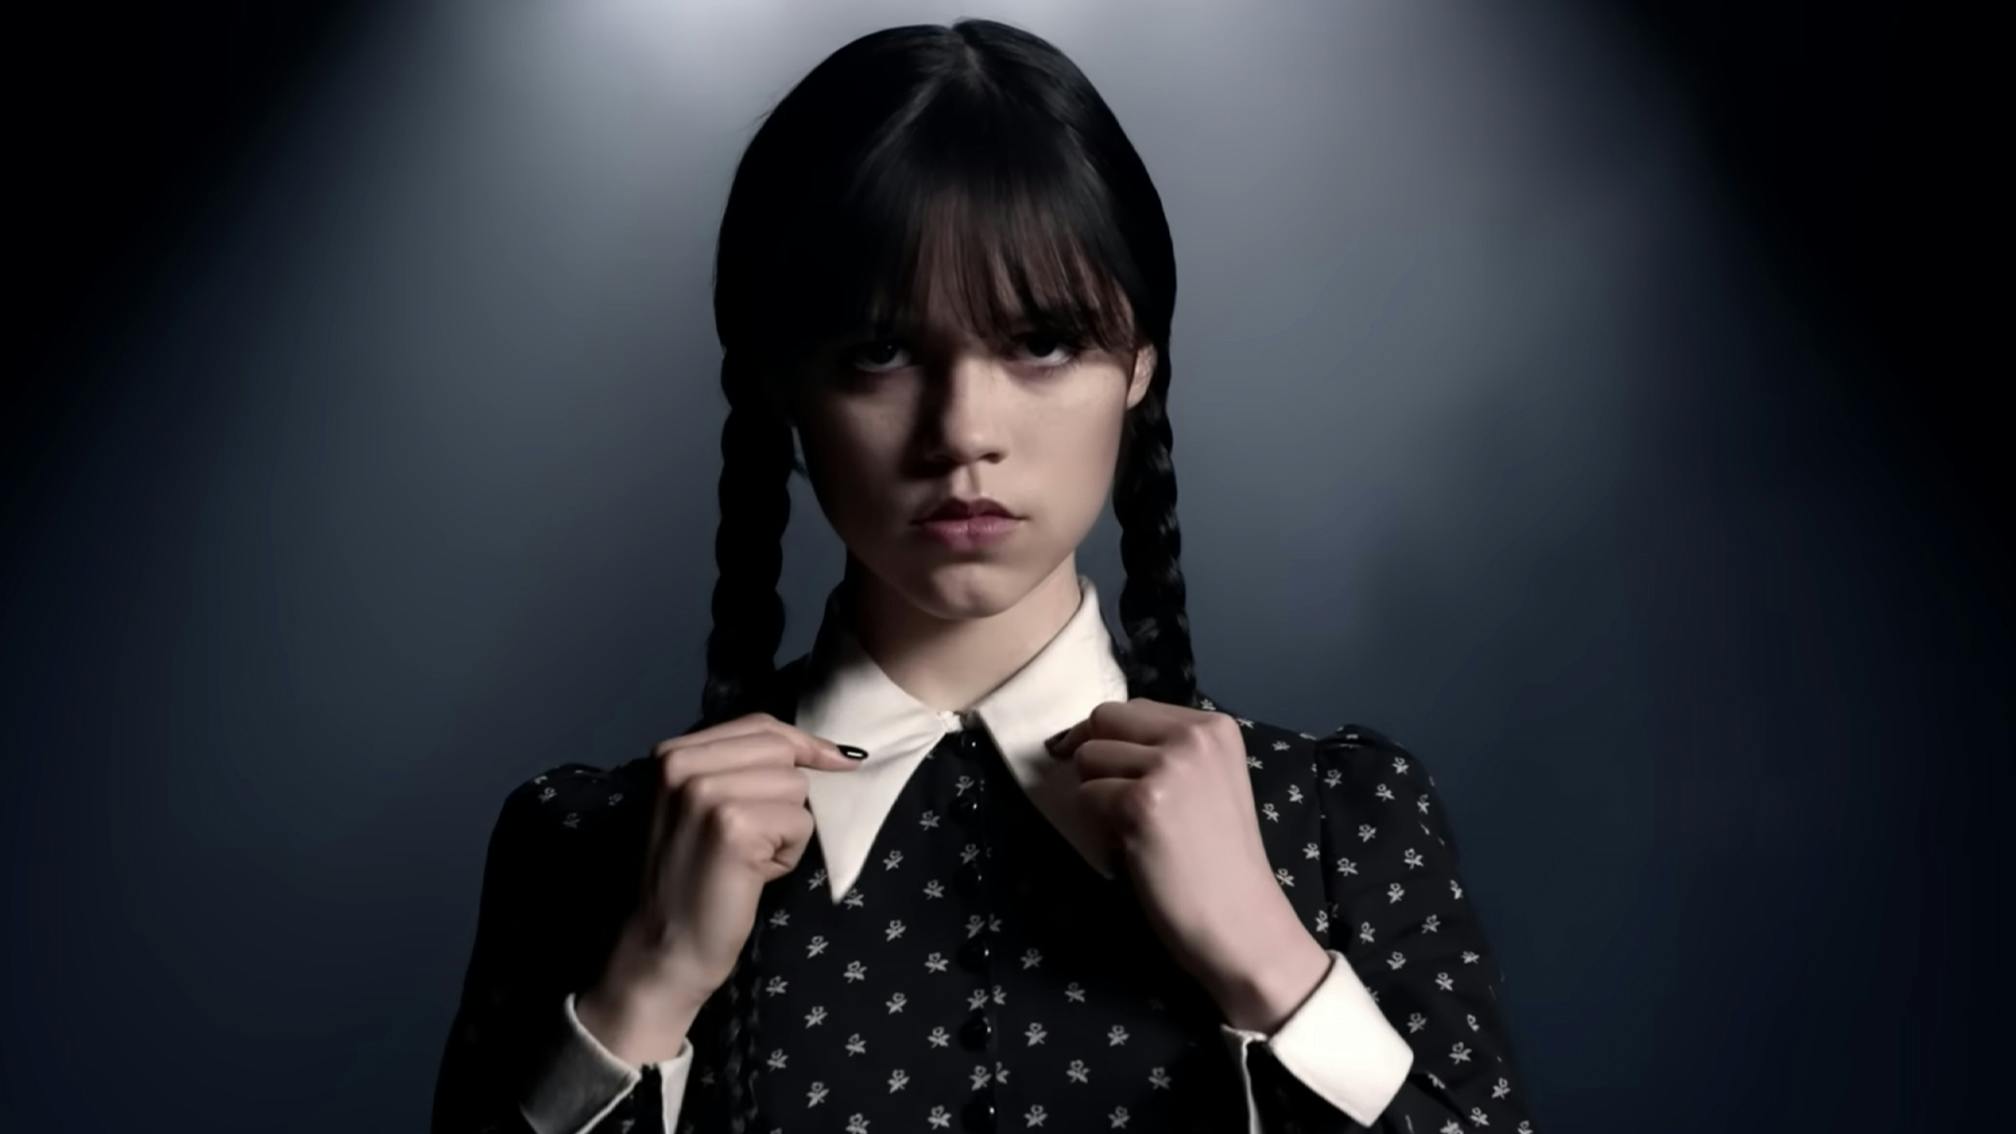 Netflix share first look at Jenna Ortega as Wednesday Addams in new Tim Burton spin-off series